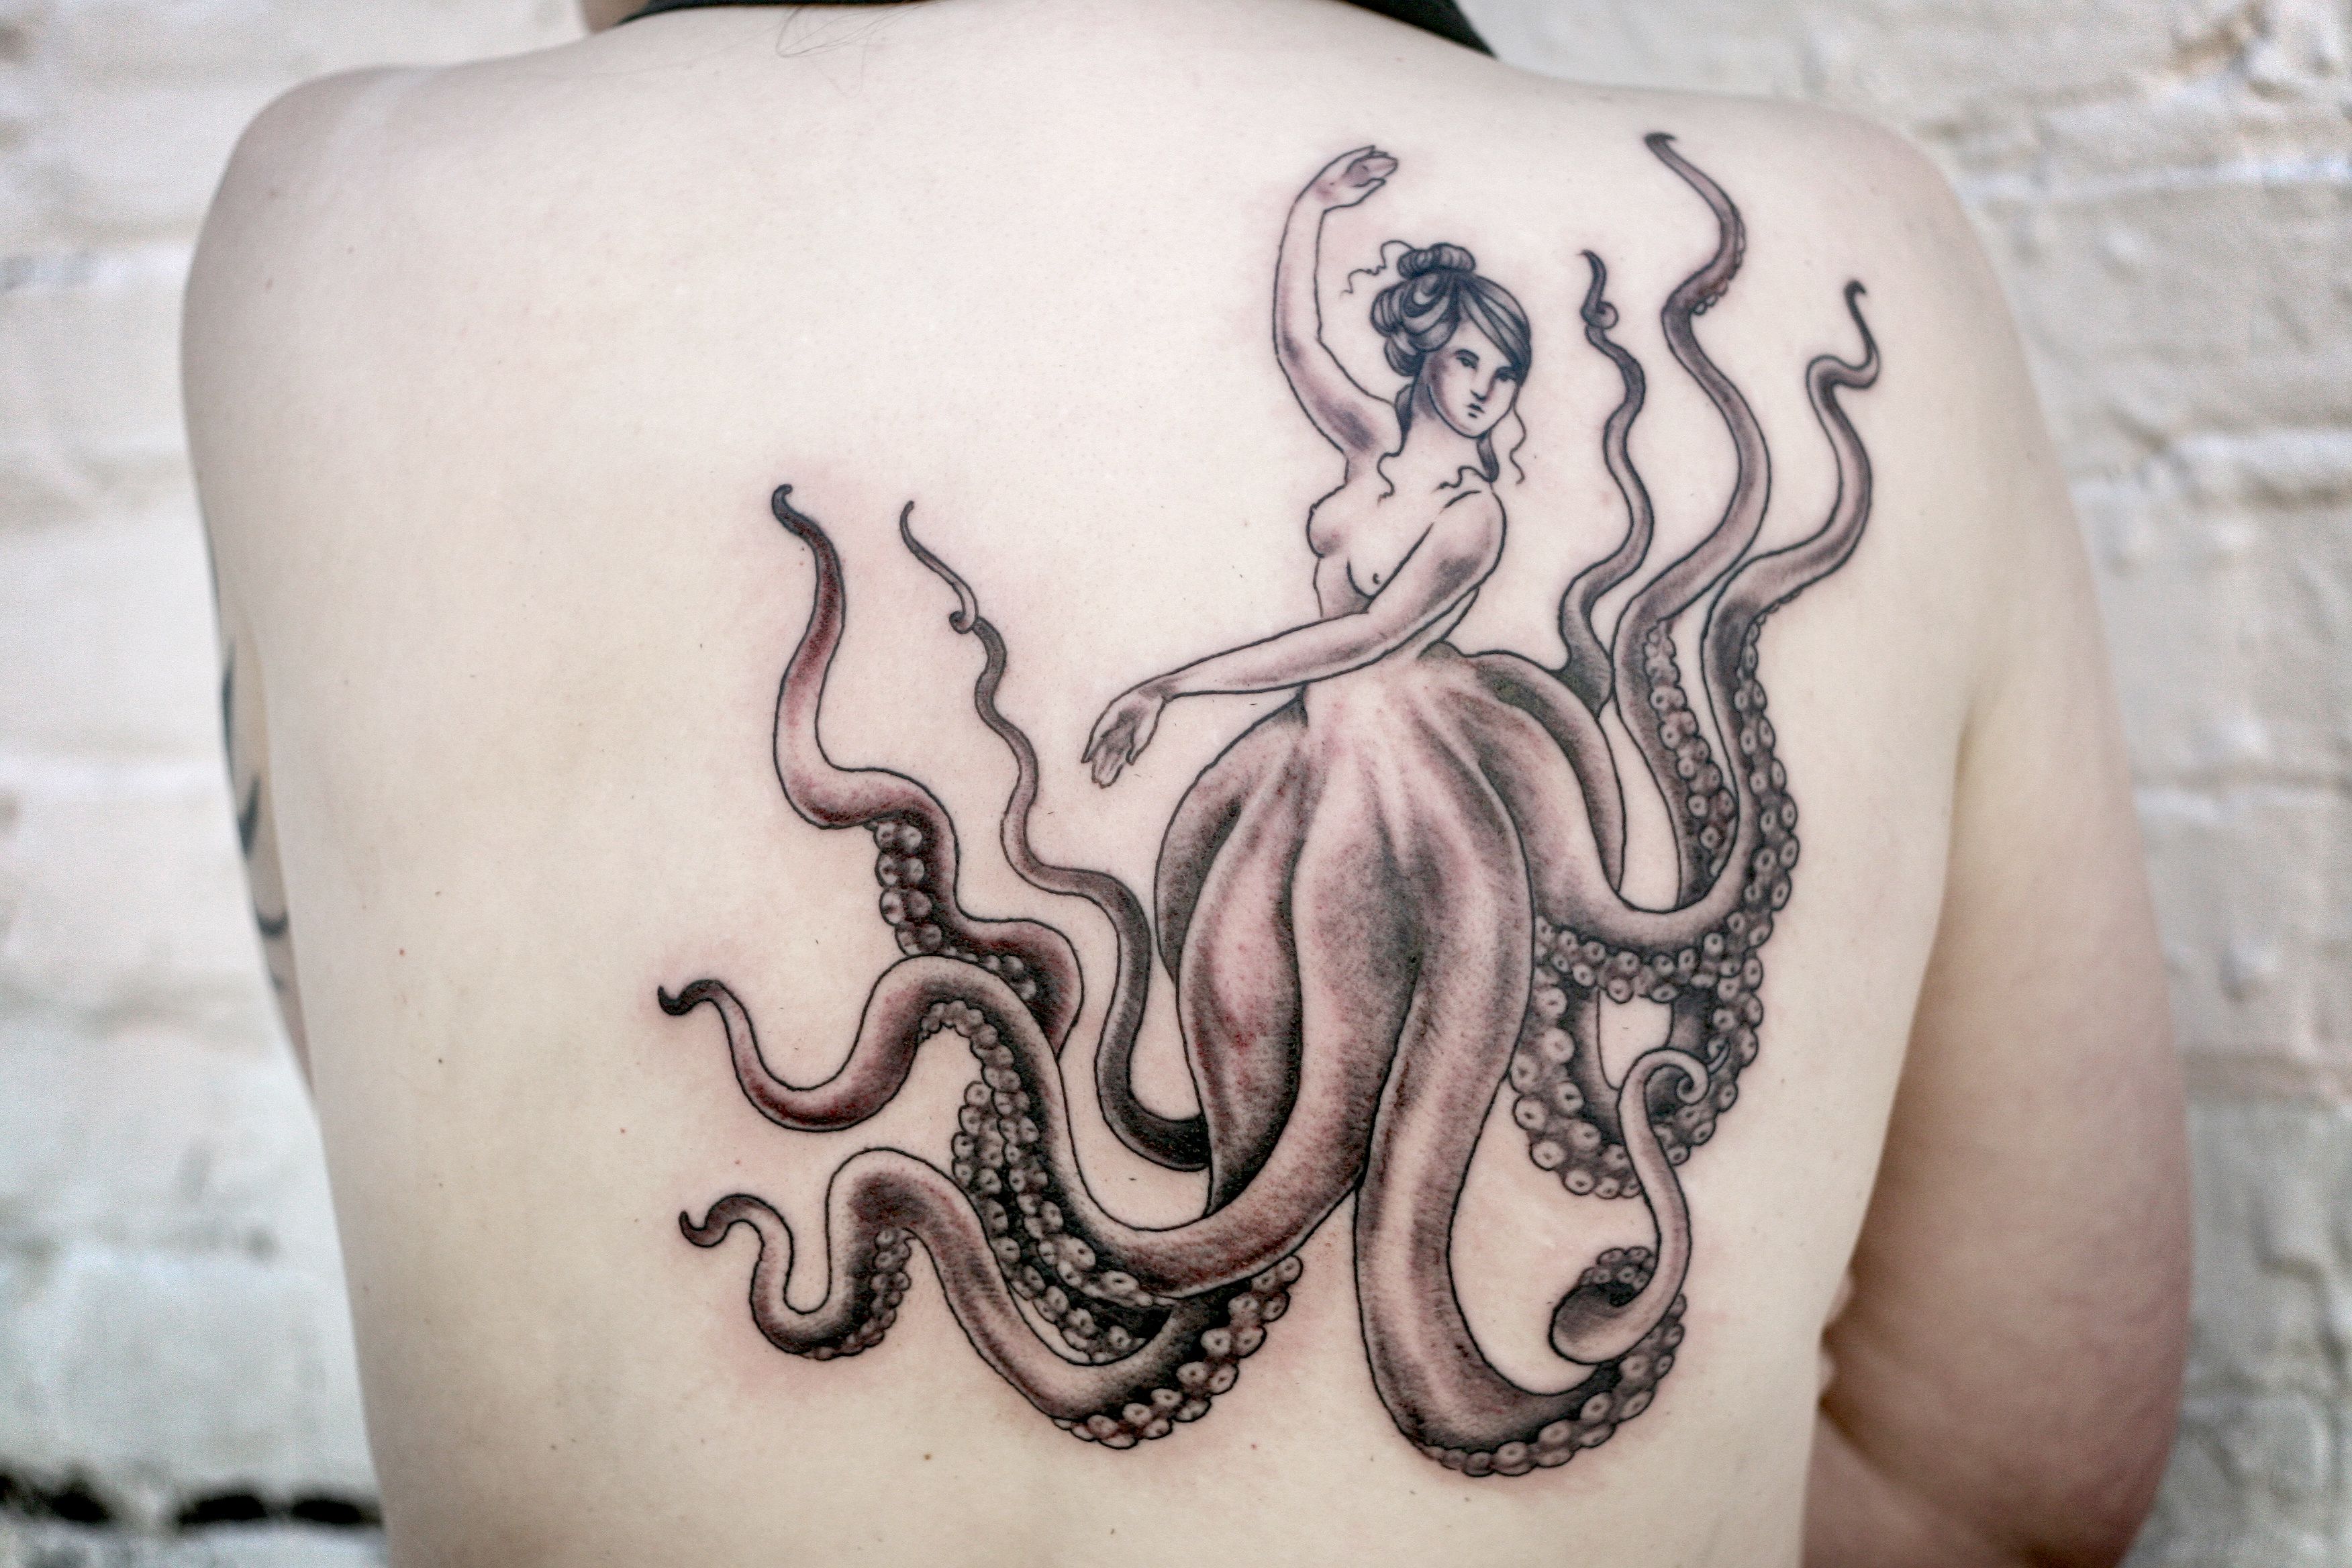 brendon fourie add photo girl with the octopus tattoo